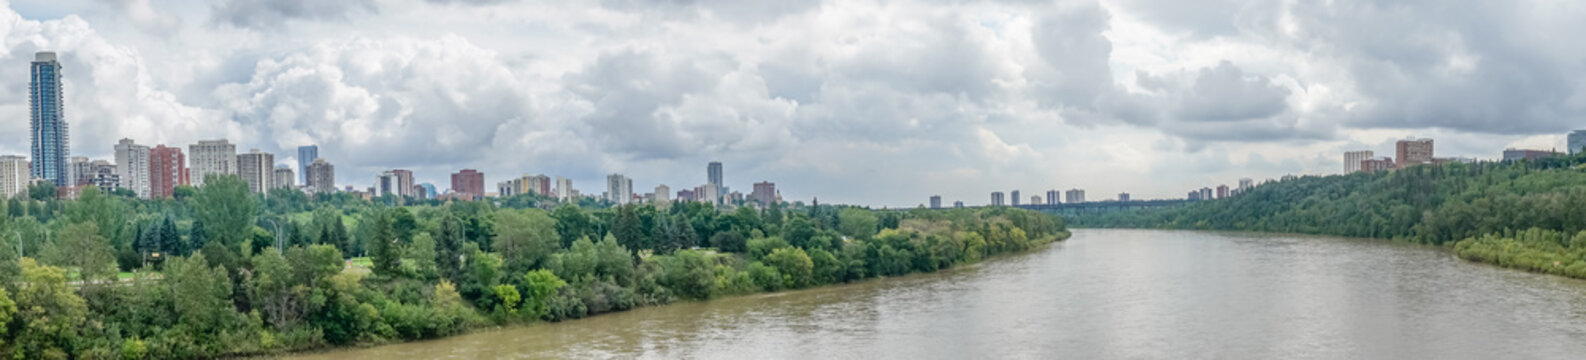 River Valley, River, Lake, Trees, Cloudy, Clouds, Skyline, Edmonton, Alberta, Canada, Cloudy day,  buildings,  skyscraper, summer, city, skyline